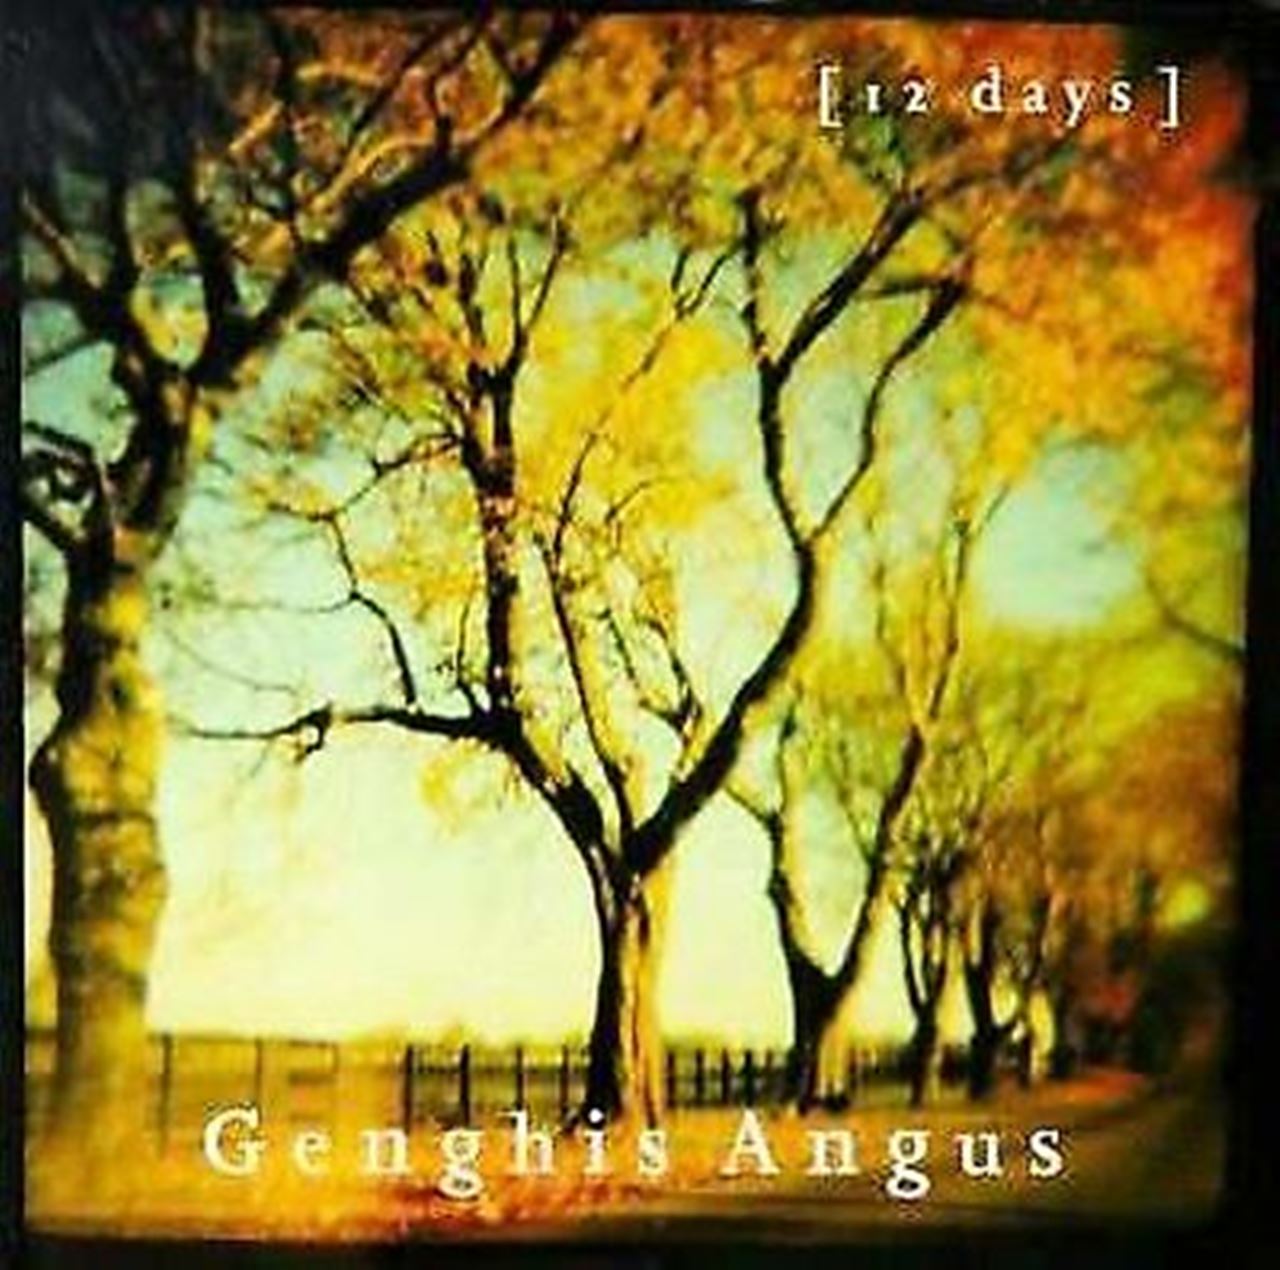 Genghis Angus – (12 Days) cover album